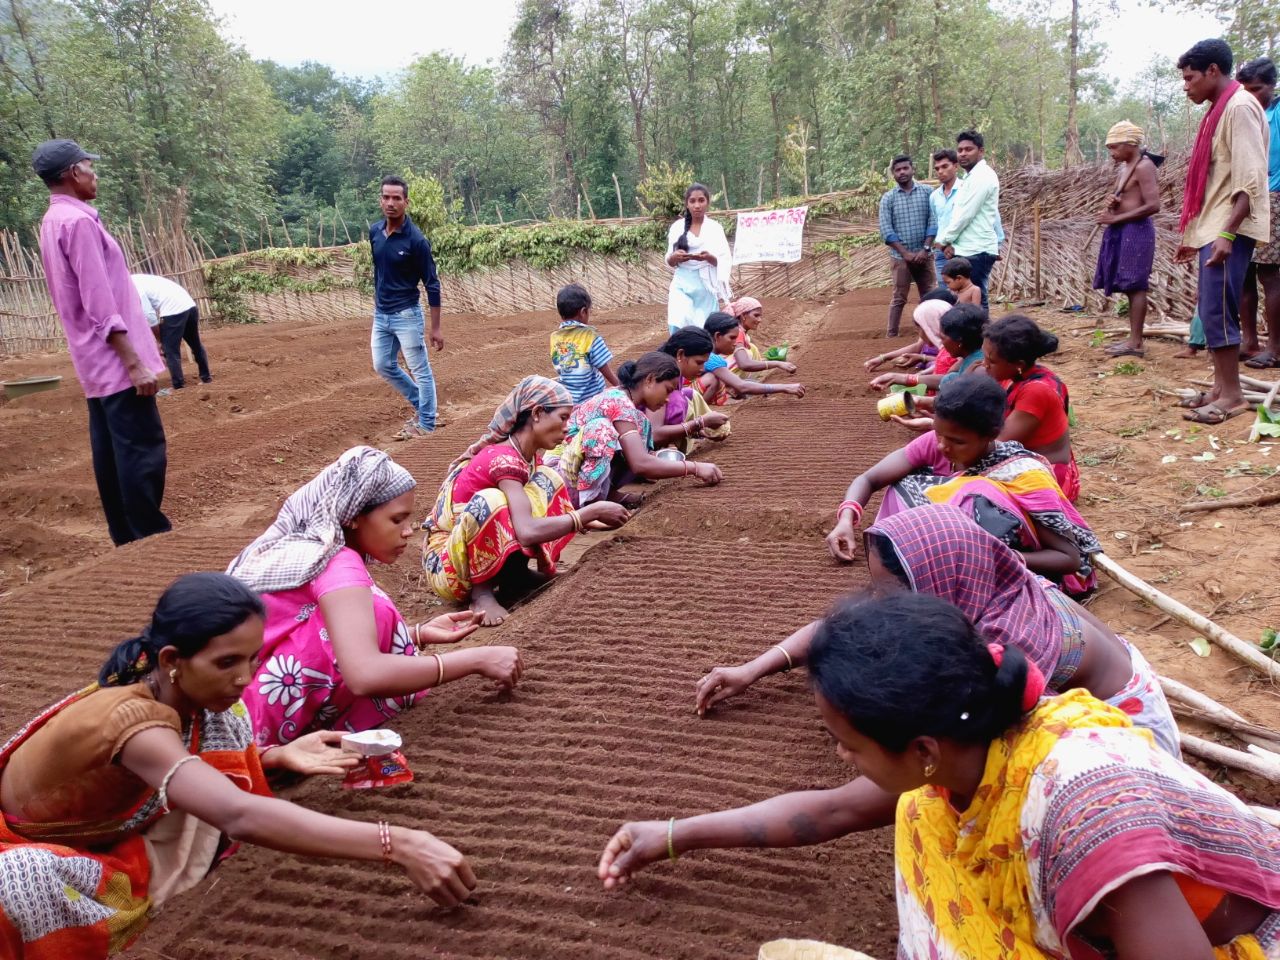 Female participation in agriculture in India